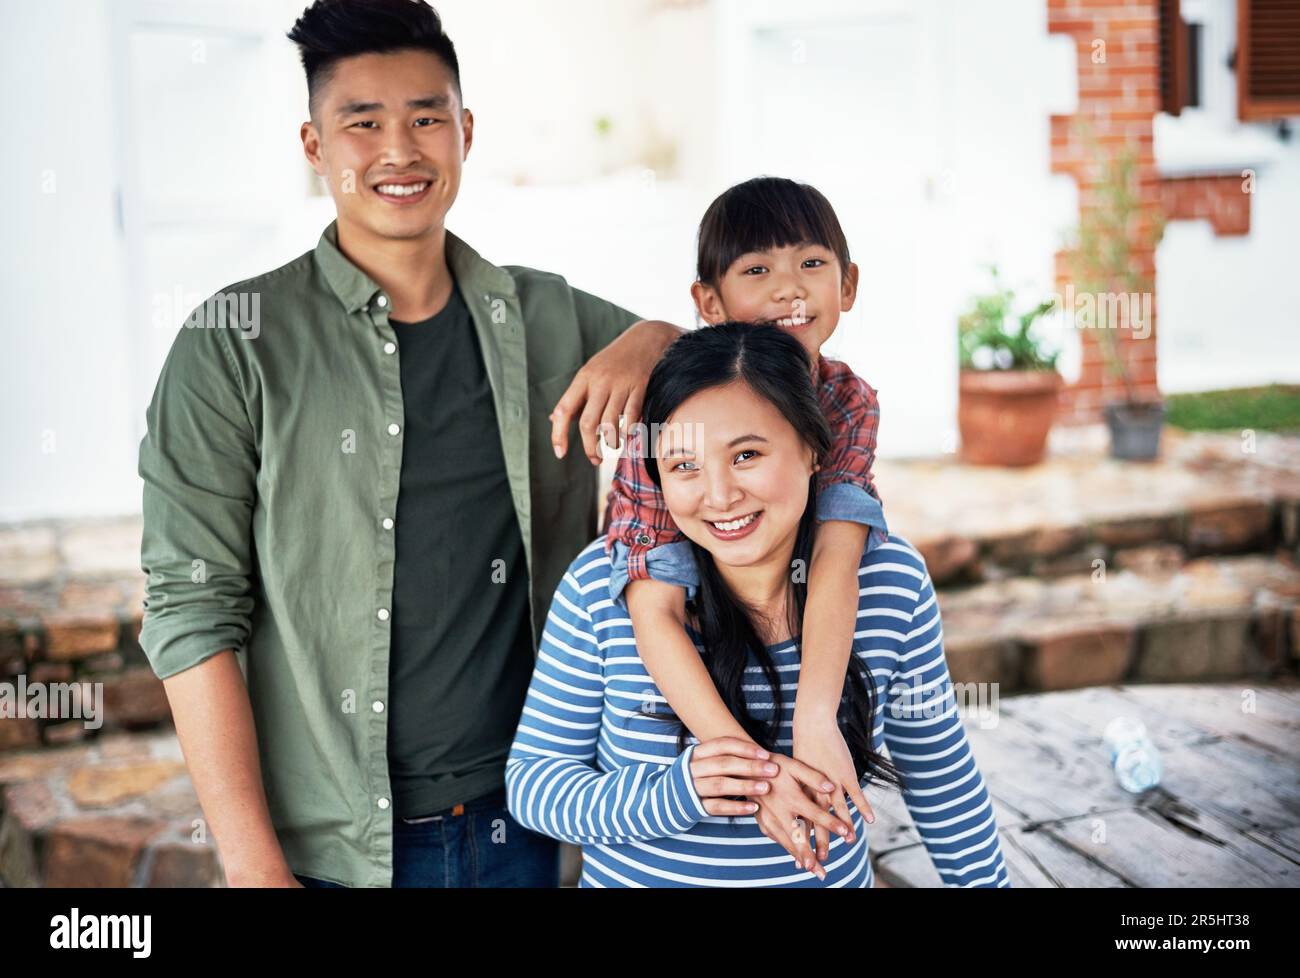 Theyre one happy family. Portrait of a happy family bonding together at home. Stock Photo